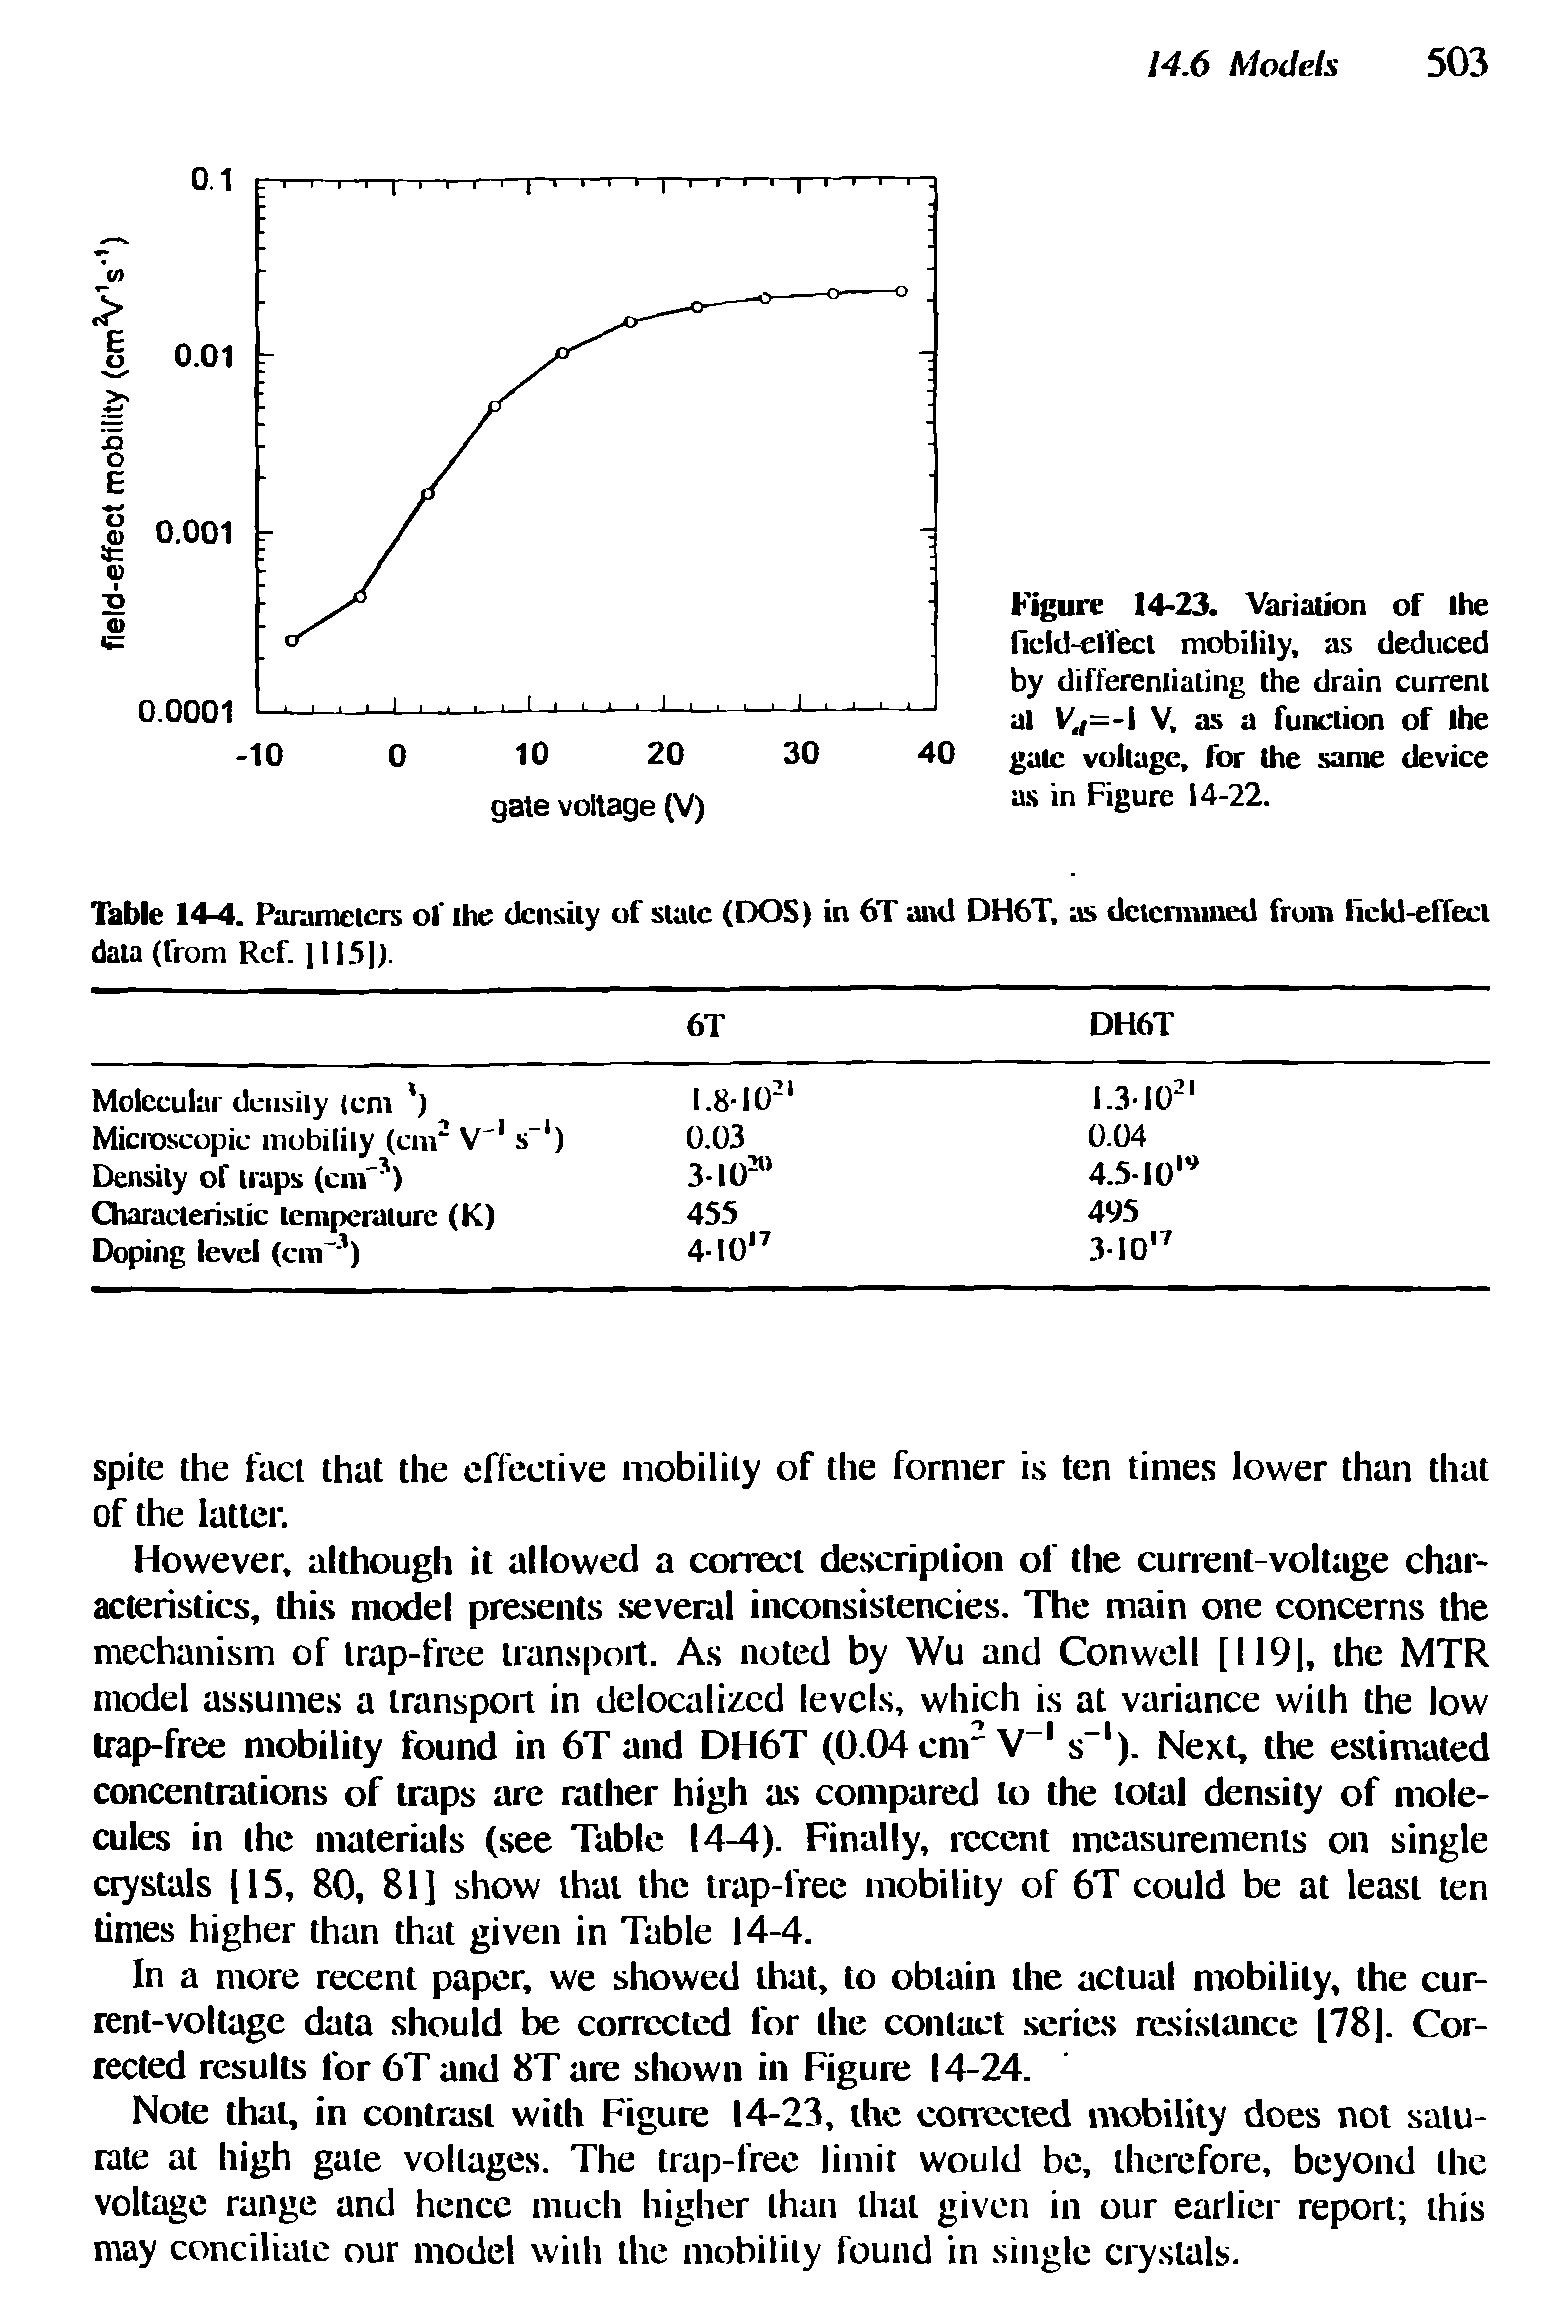 Table 14-4. Parameters of the density of state (DOS) in 6T and DH6T, as determined from licld-efTeel data (from Ref. ] 115]).